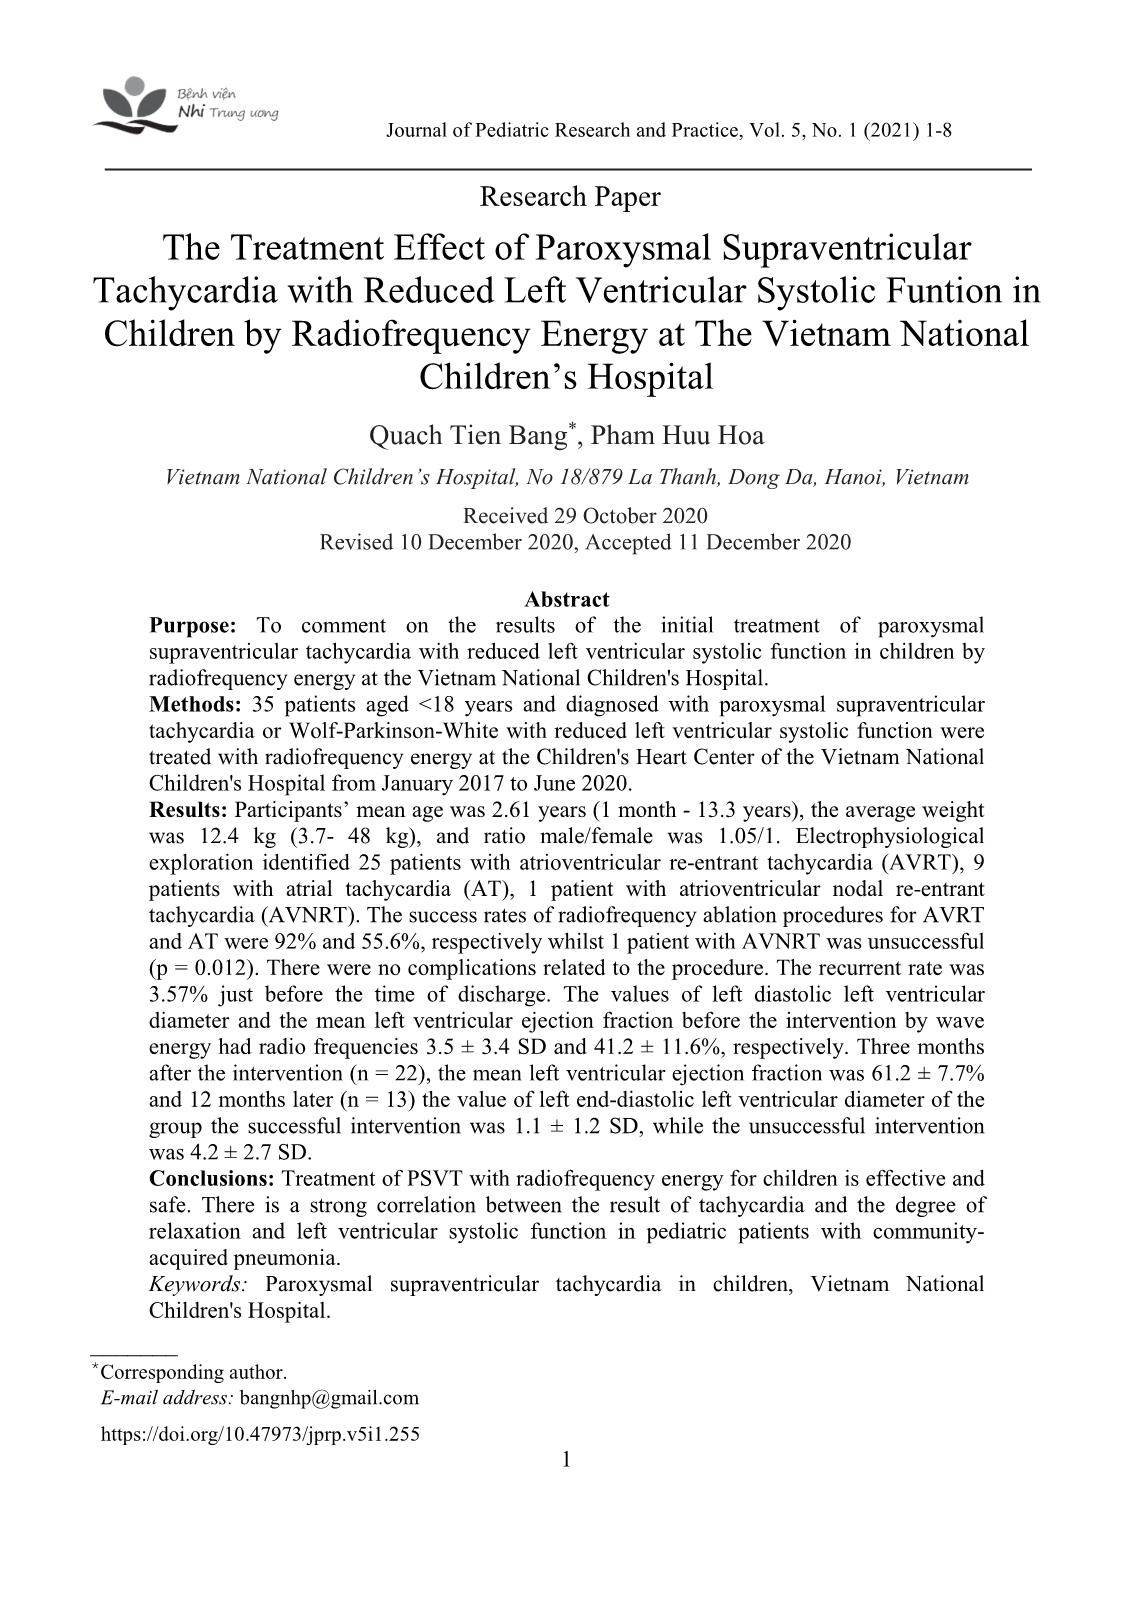 The treatment effect of paroxysmal supraventricular tachycardia with reduced left ventricular systolic funtion in children by radiofrequency energy at the Viet Nam national children’s hospital trang 1